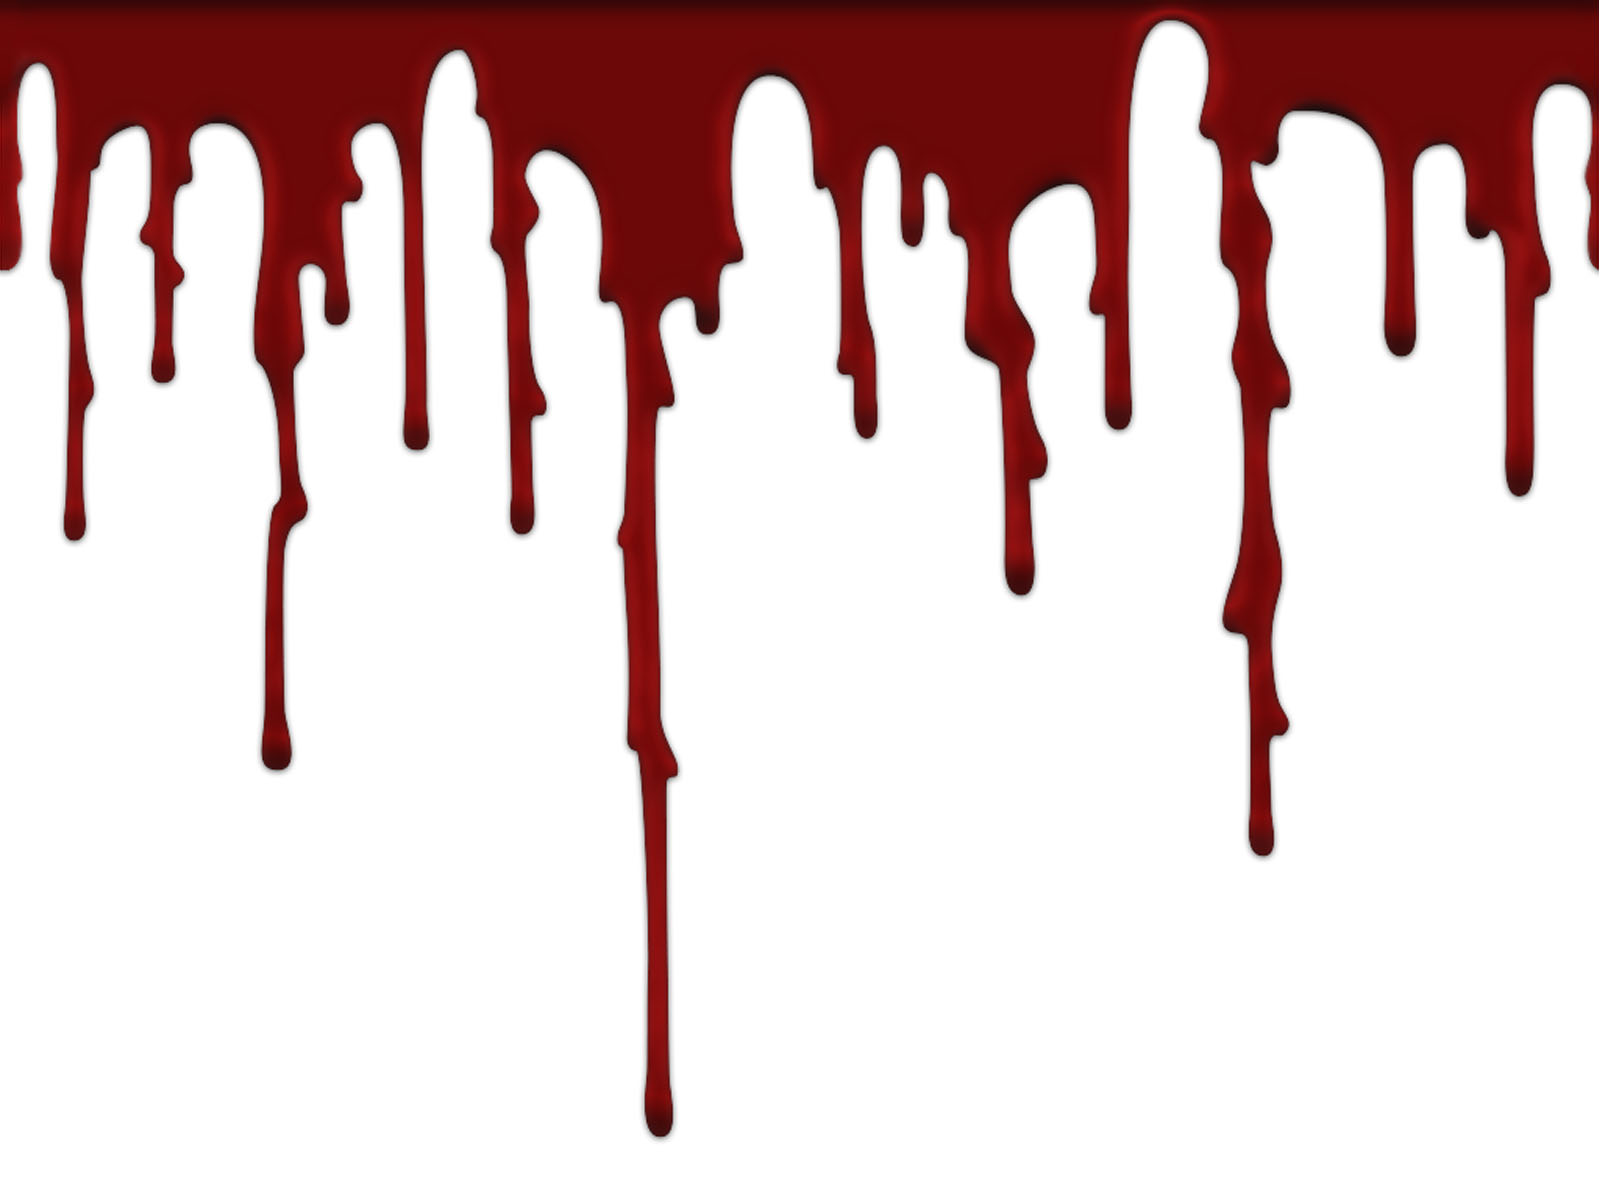 Blood on White Free PPT Backgrounds for your PowerPoint Templates